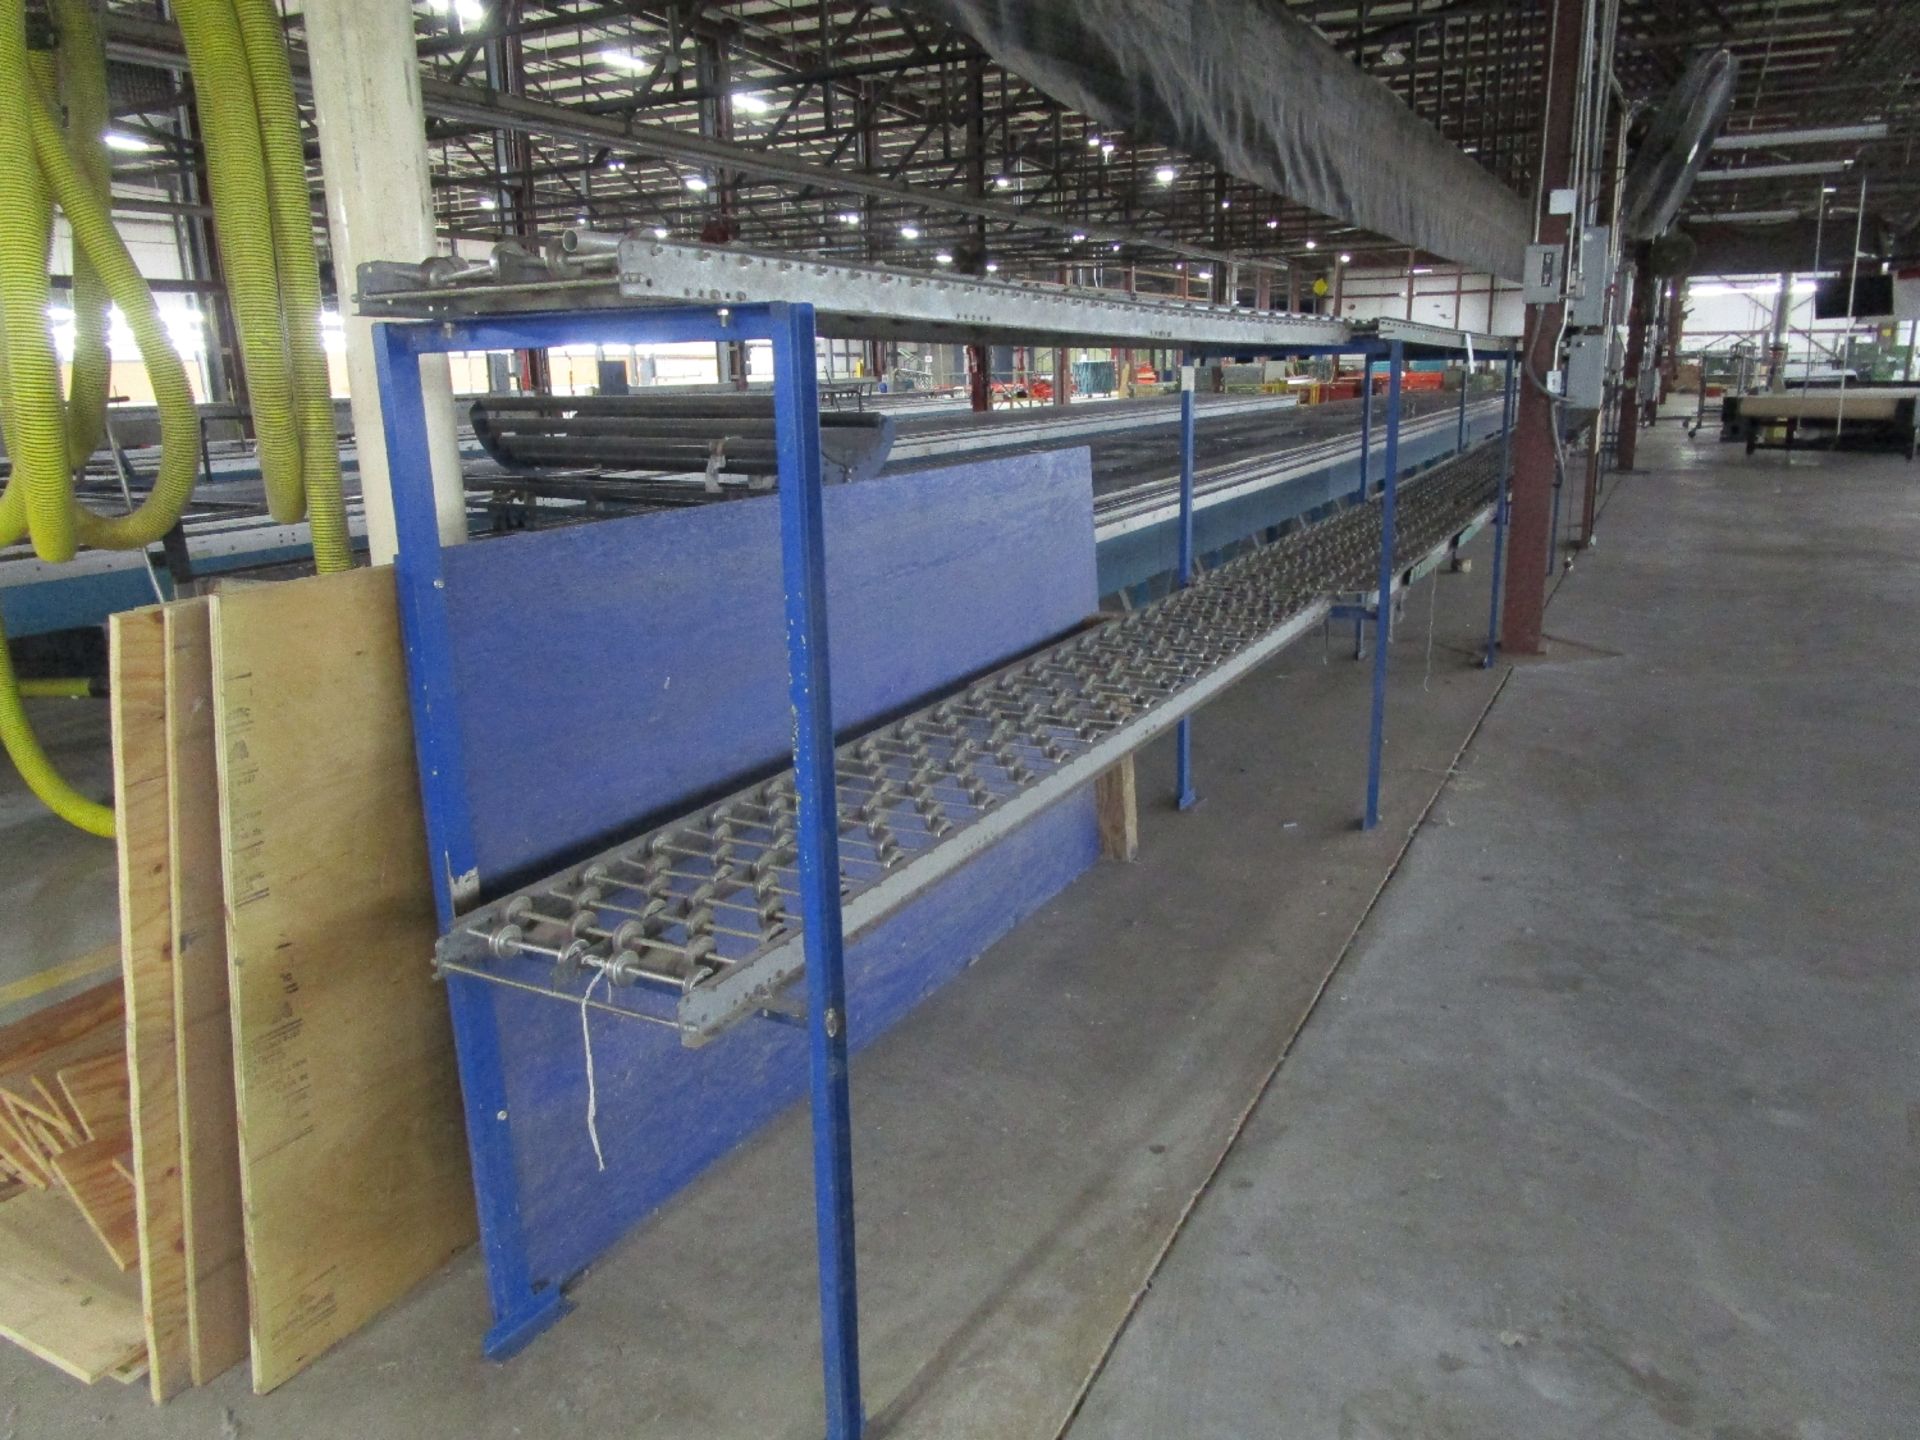 (2) Double Tier Roller Conveyors Approx. 100'L x 24"W'